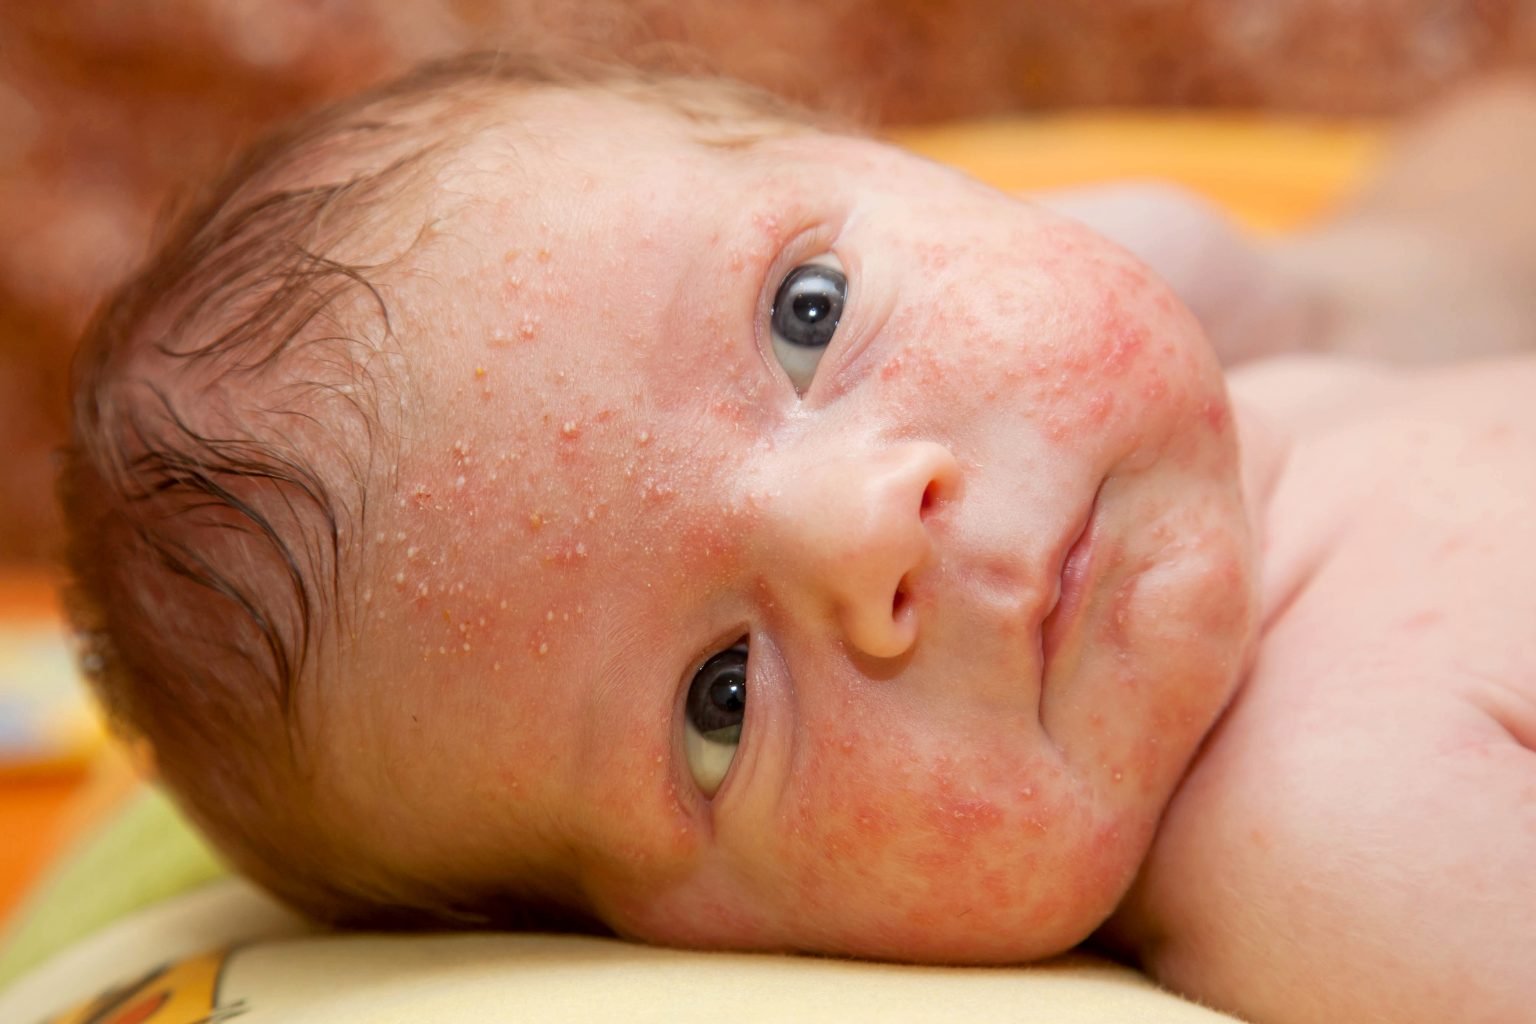 Baby Eczema vs Other Skin Conditions